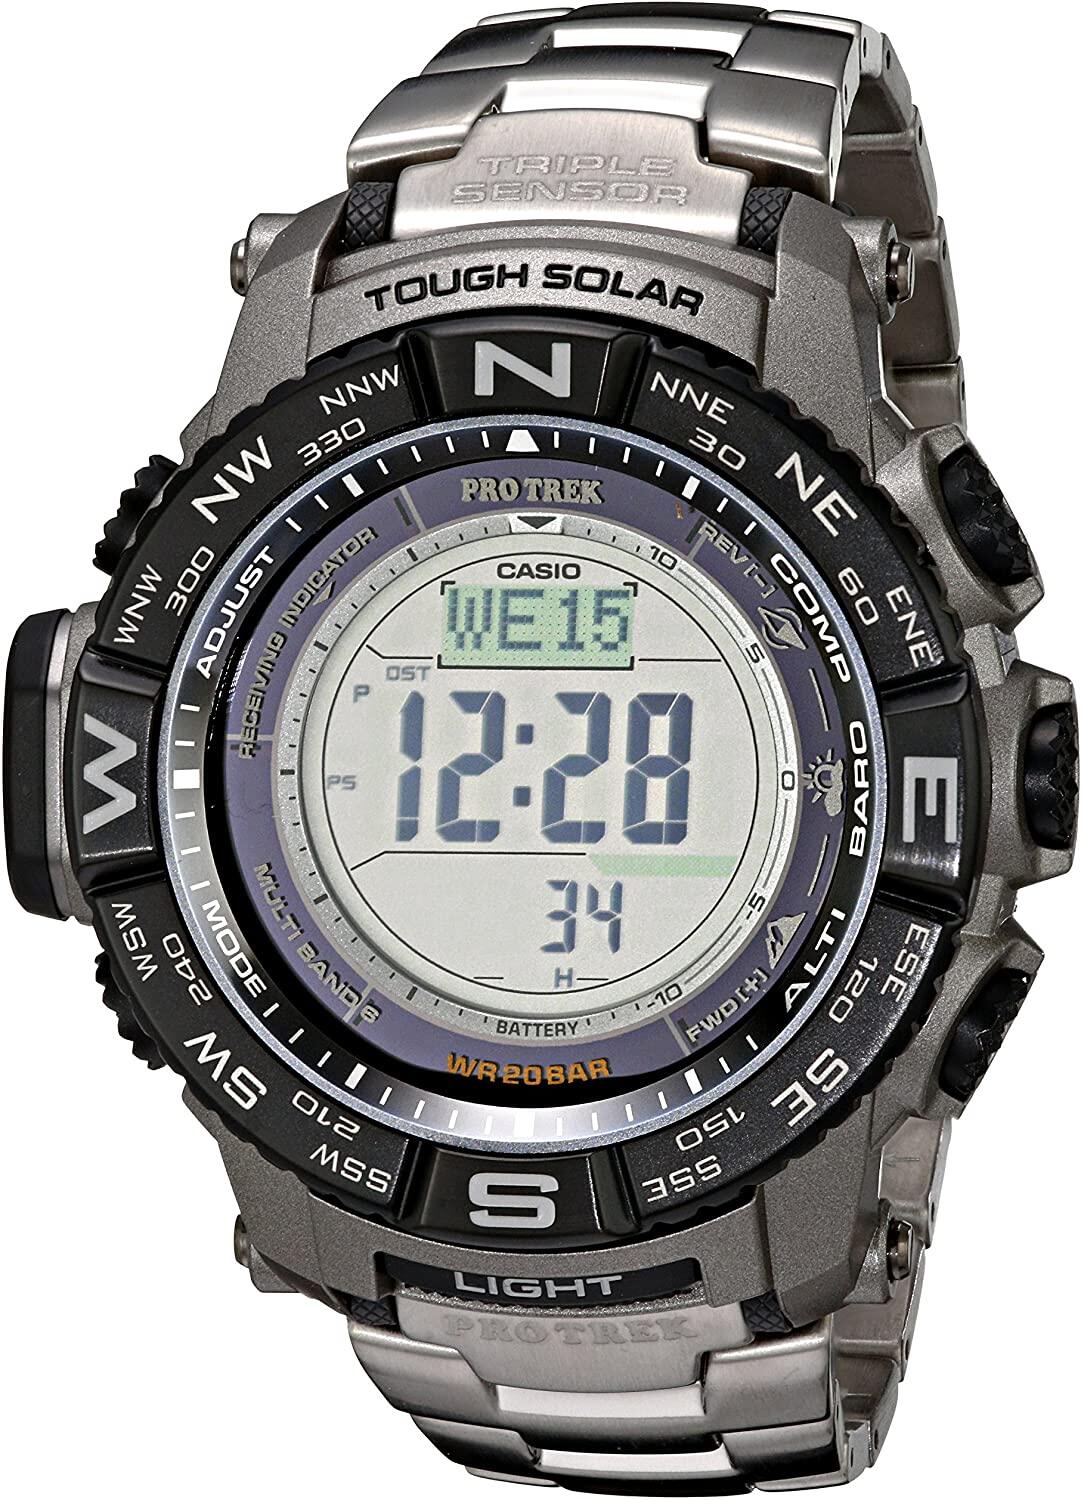 Casio Pro Trek Watch Shop Casio Pro Trek Watch With Great Discounts And Prices Online Lazada Philippines